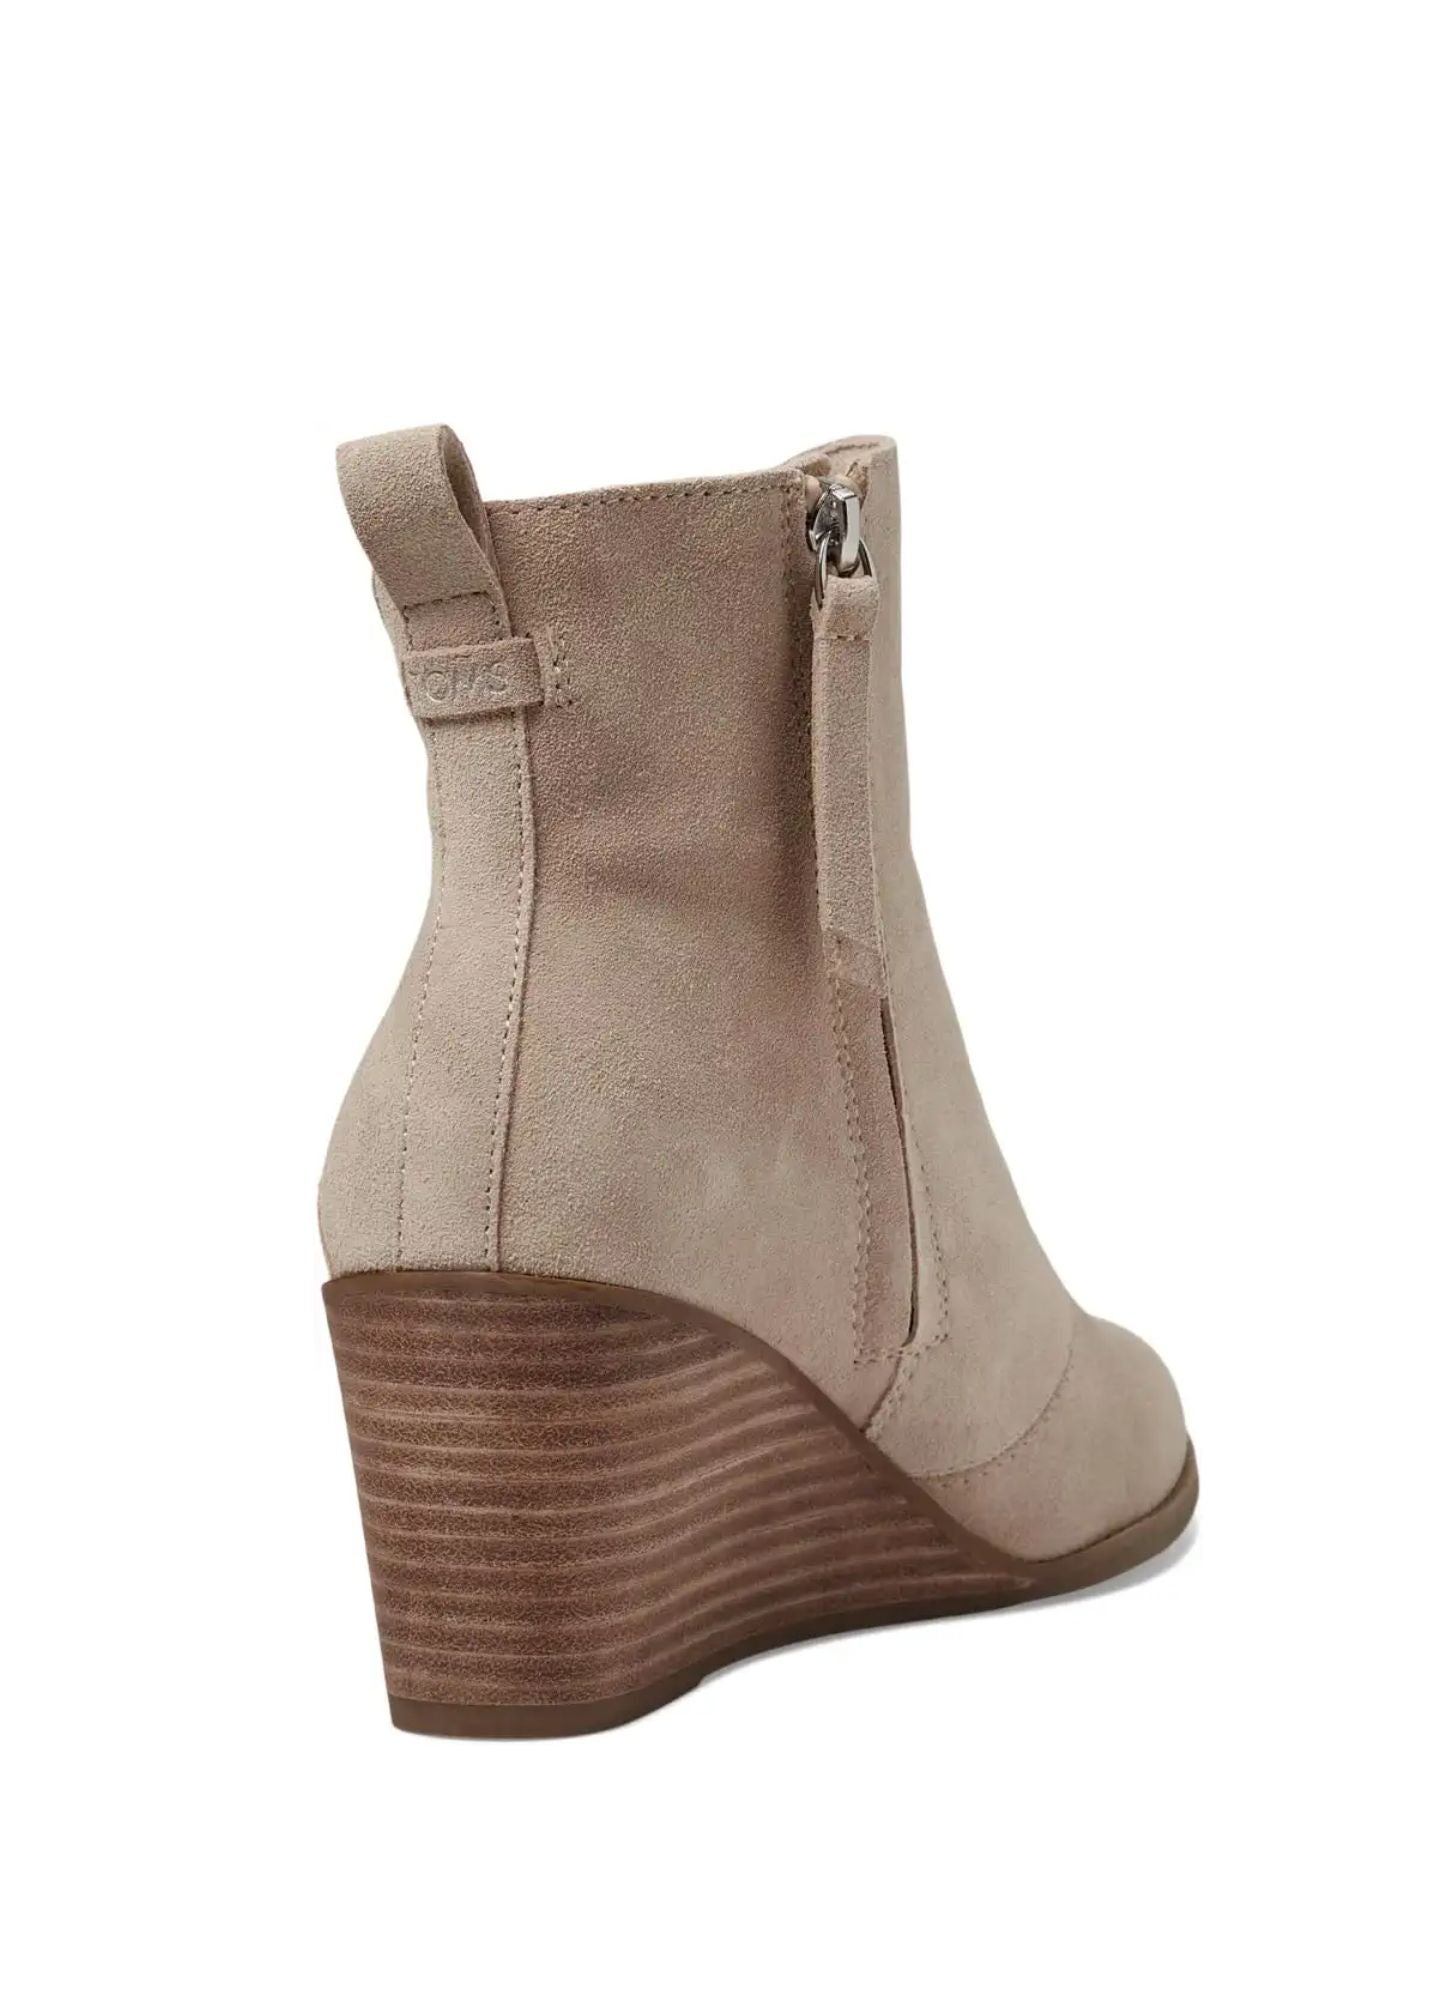 TOMS® Sutton Suede Wedge Boot Shoes